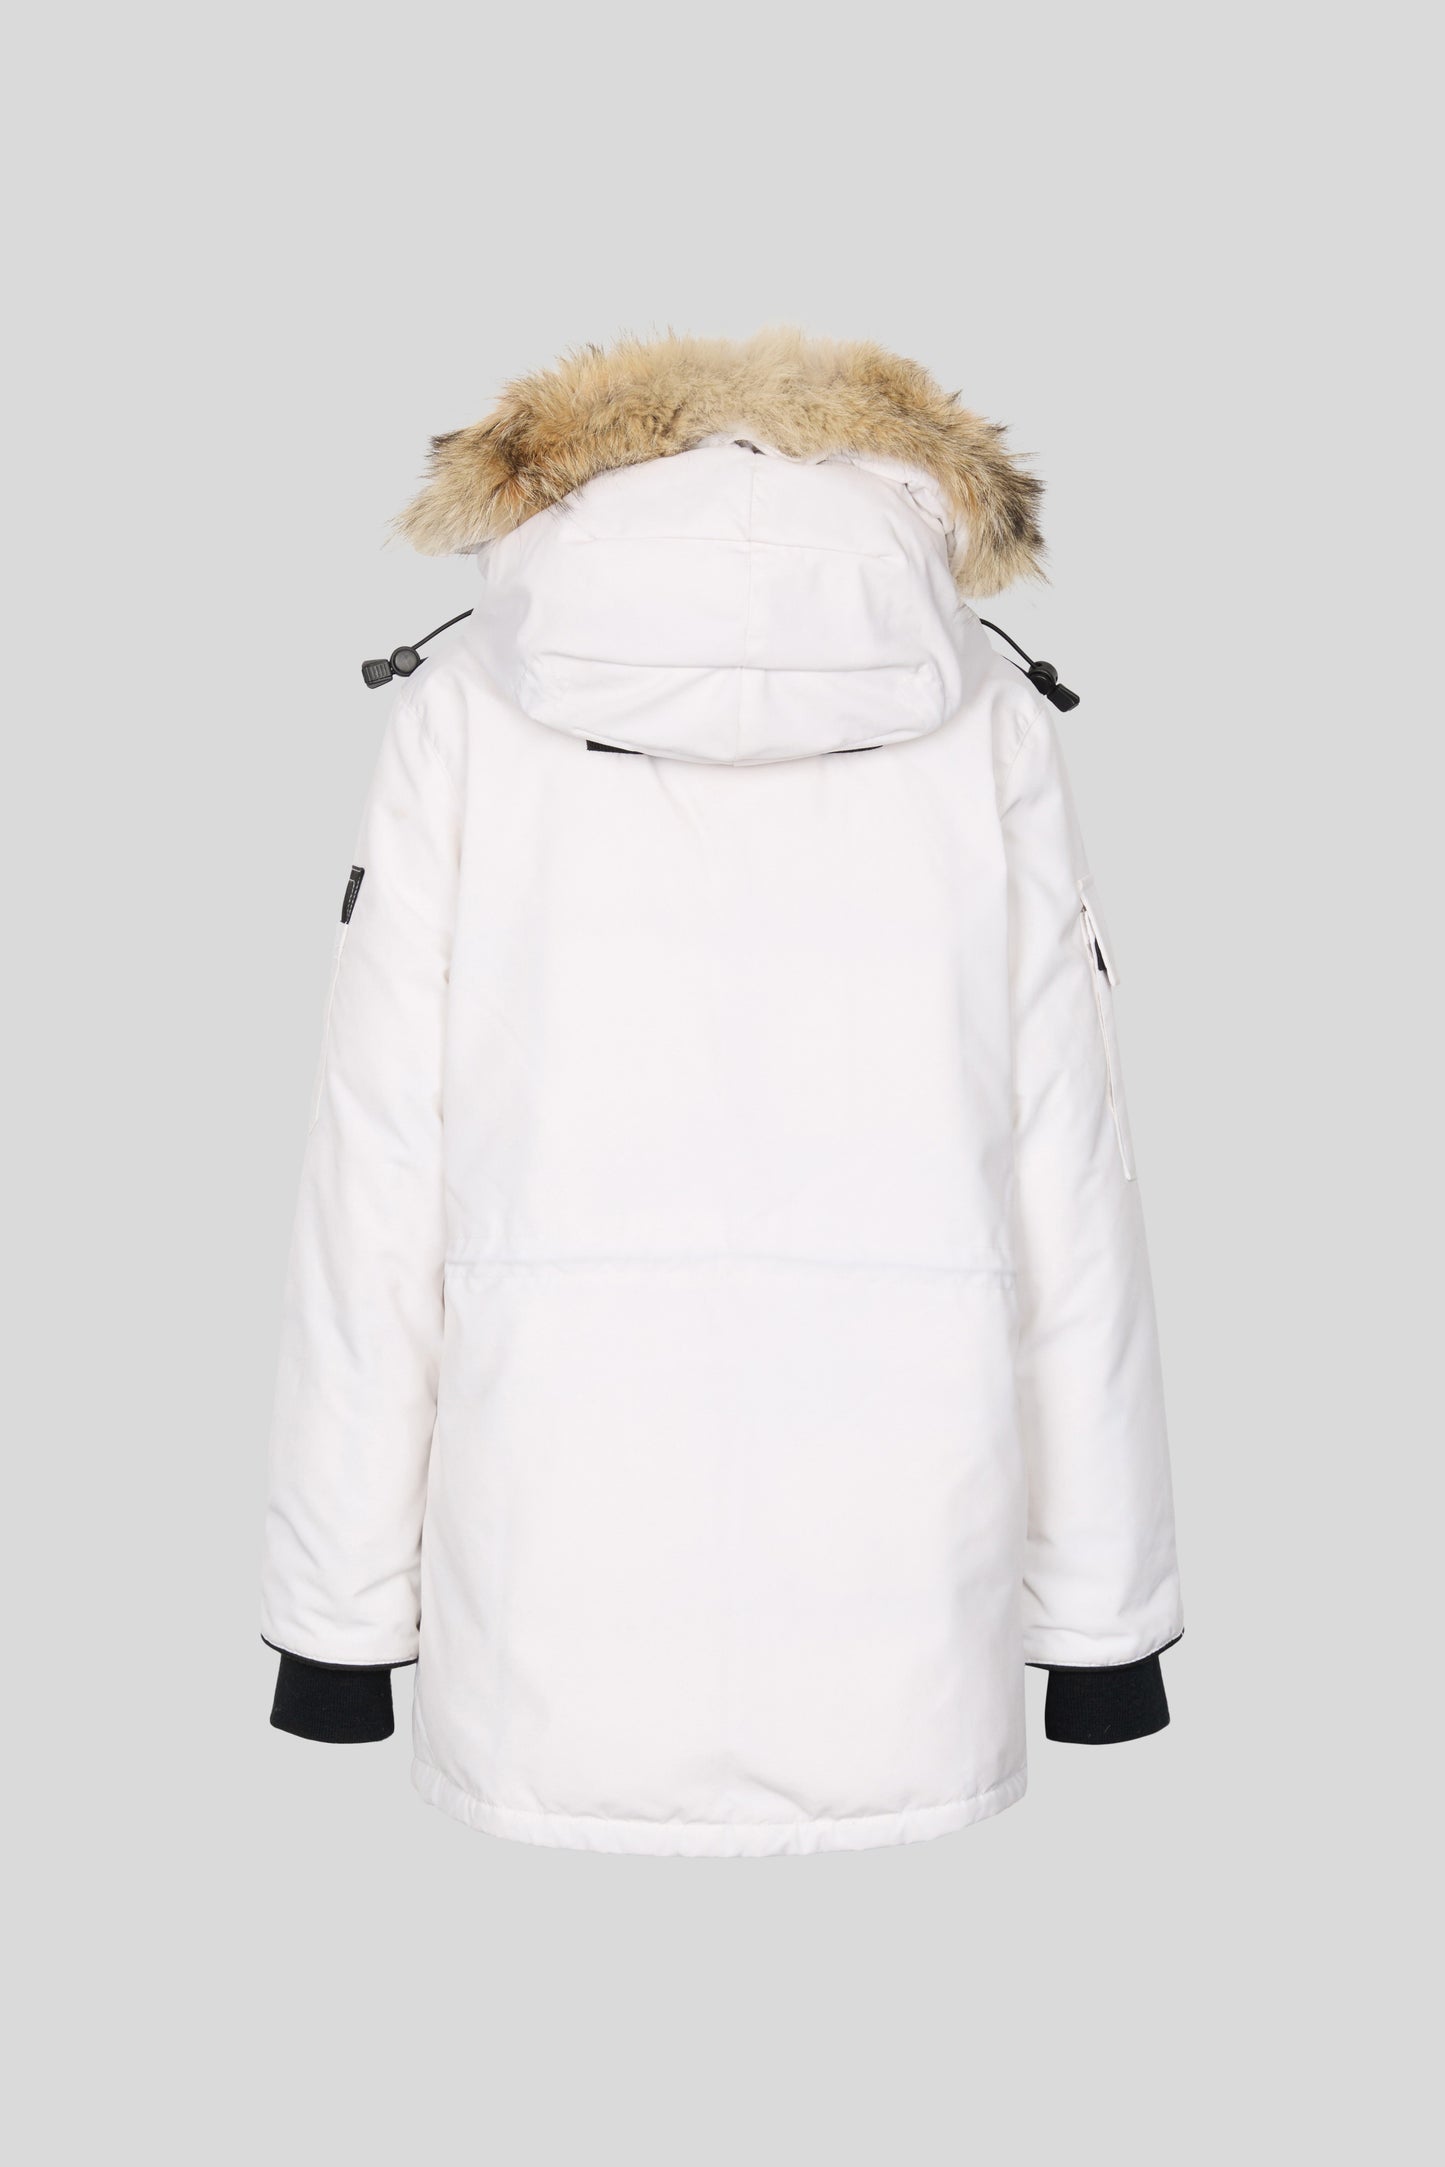 Expedition Parka Fusion Fit